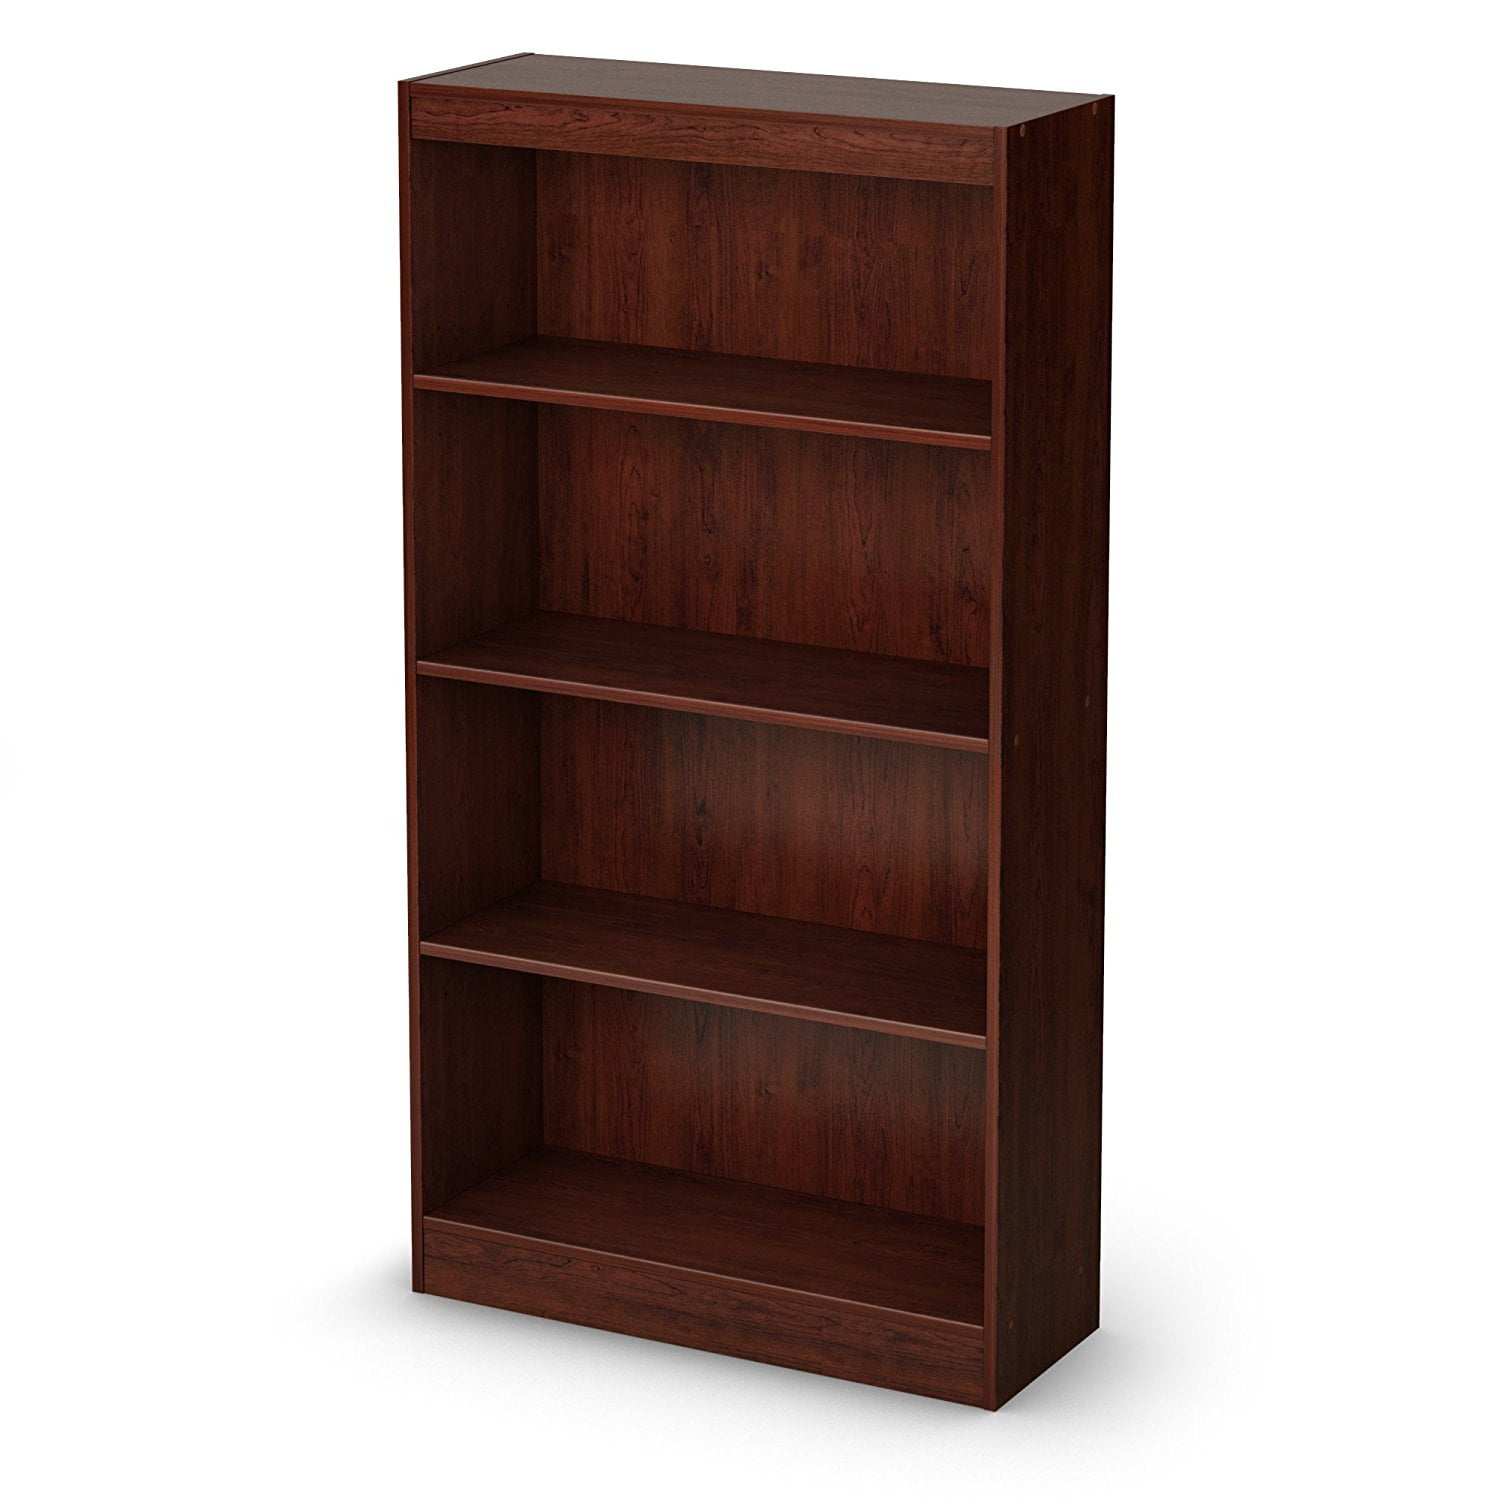 New 4 Shelf Bookcase with Simple Decor